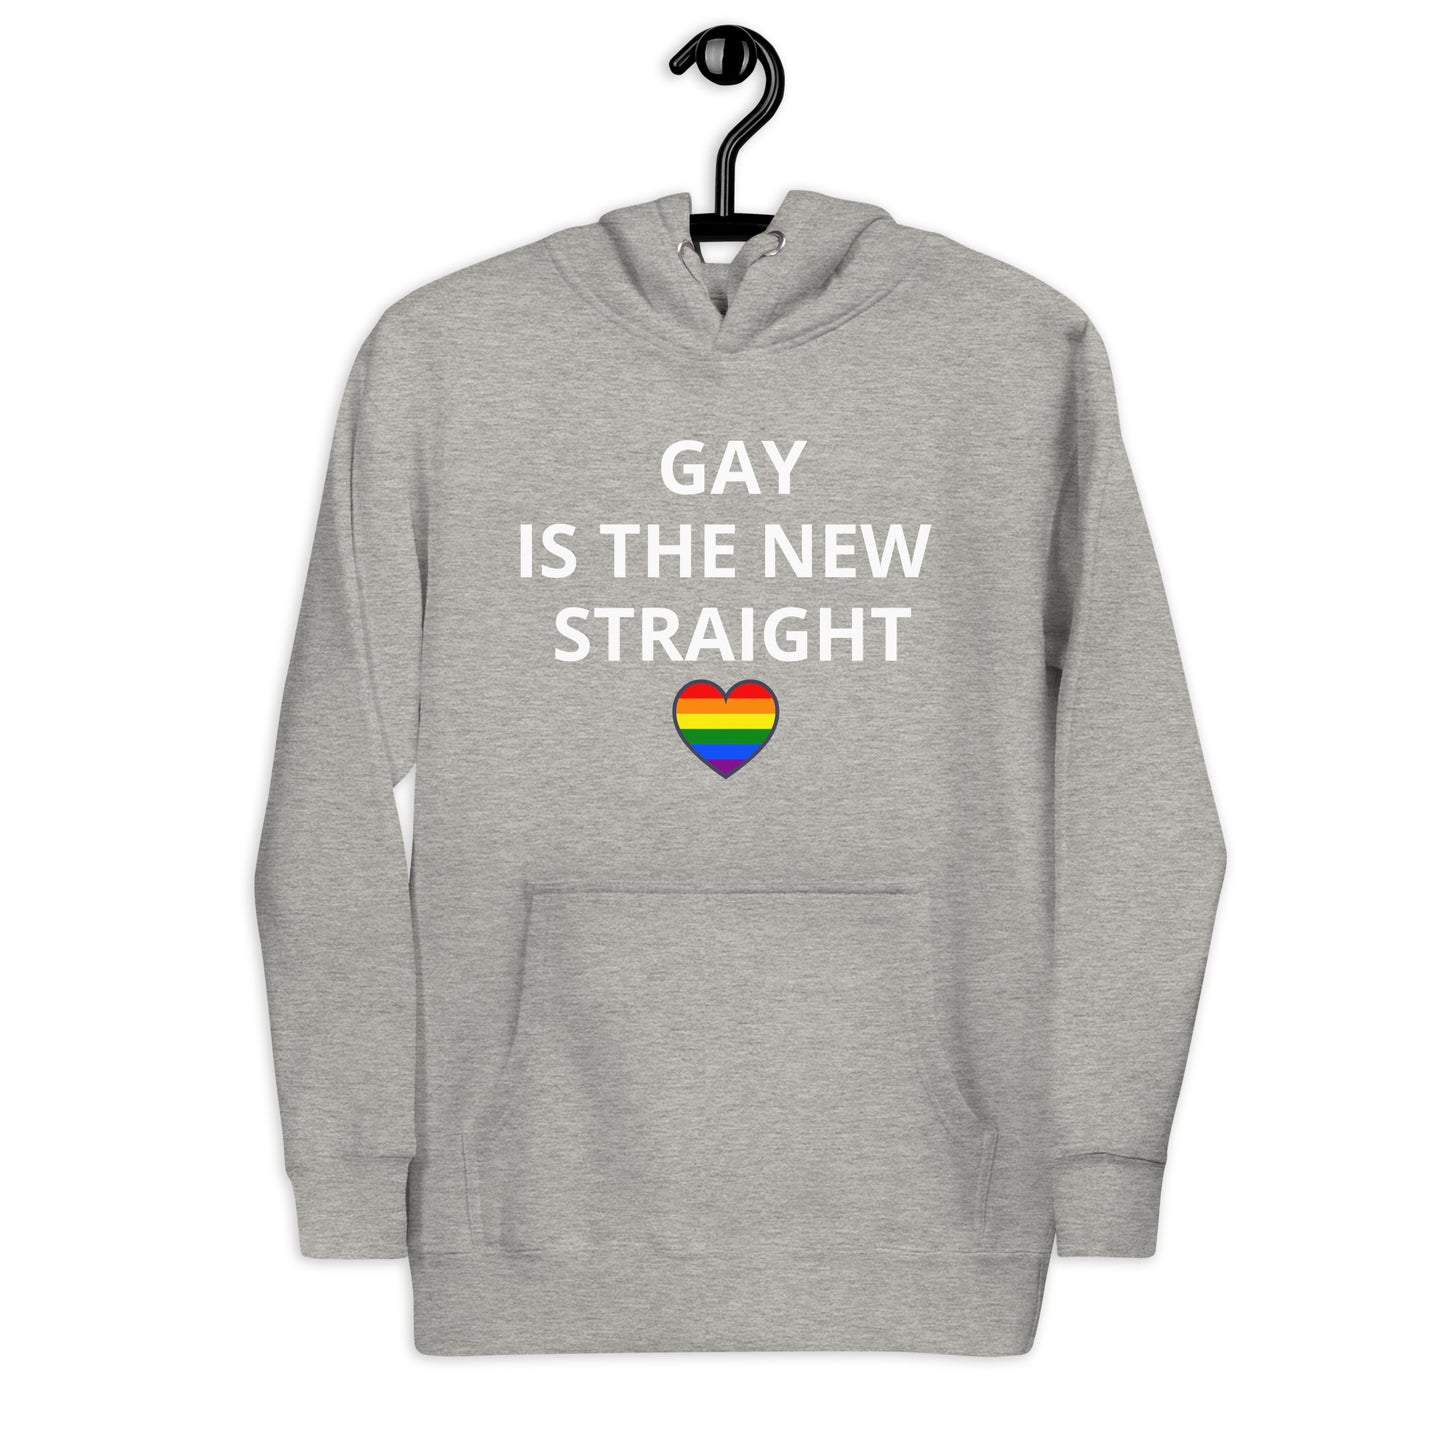 Gay Is The New Straight Lettered Unisex Hoodie W/ Pride Heart